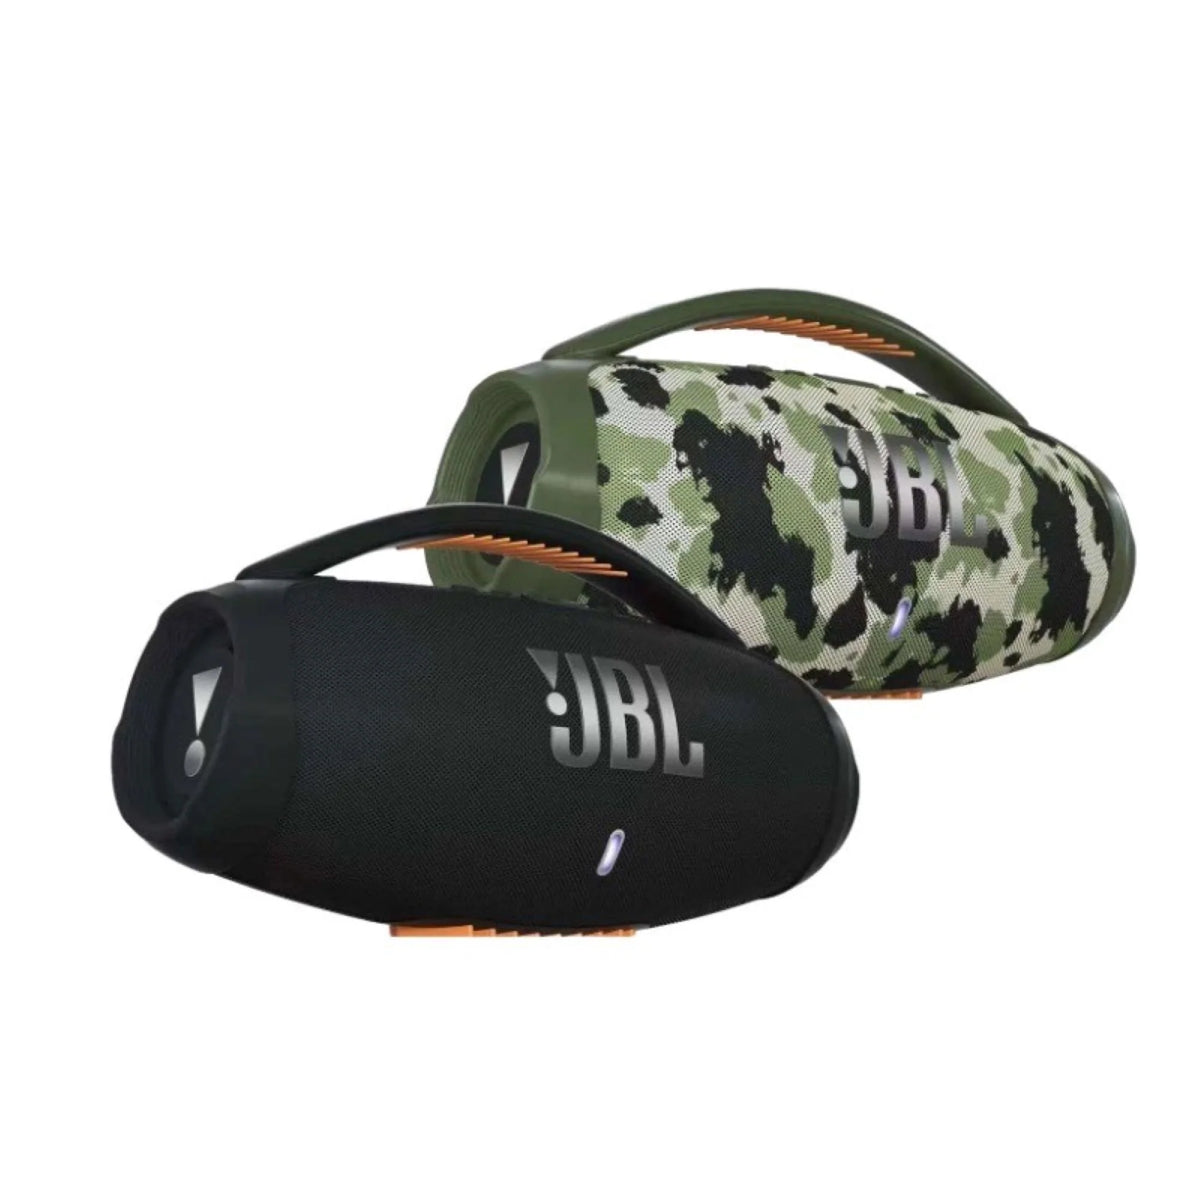 JBL Boombox 3 - Portable Bluetooth Speaker, Powerful Sound and Monstrous bass Black And Camouflage Color